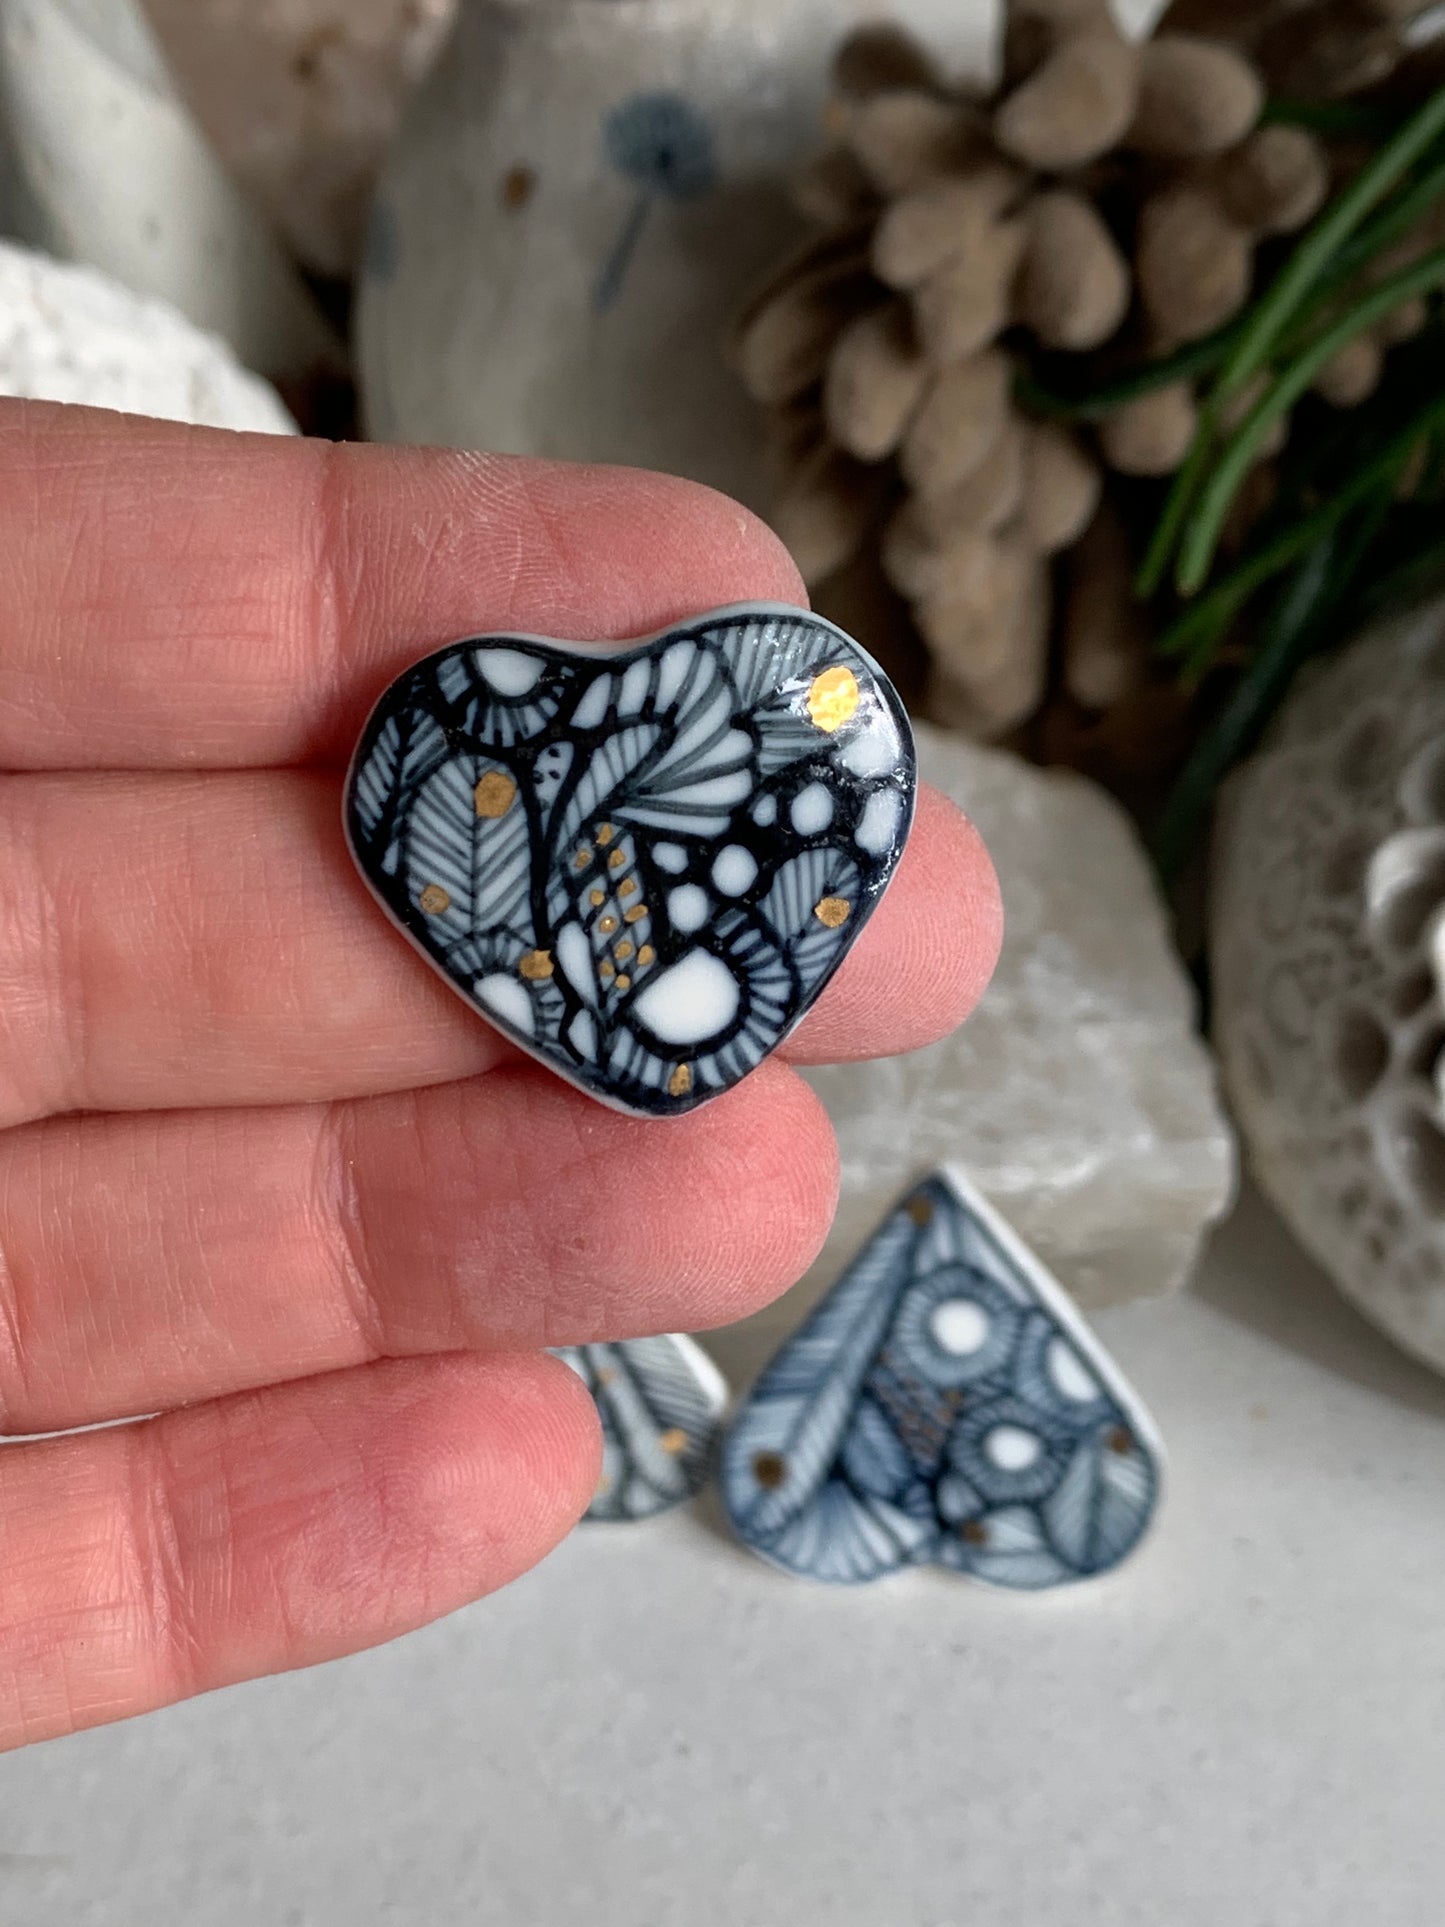 Indigo and white hand painted brooch, choose one